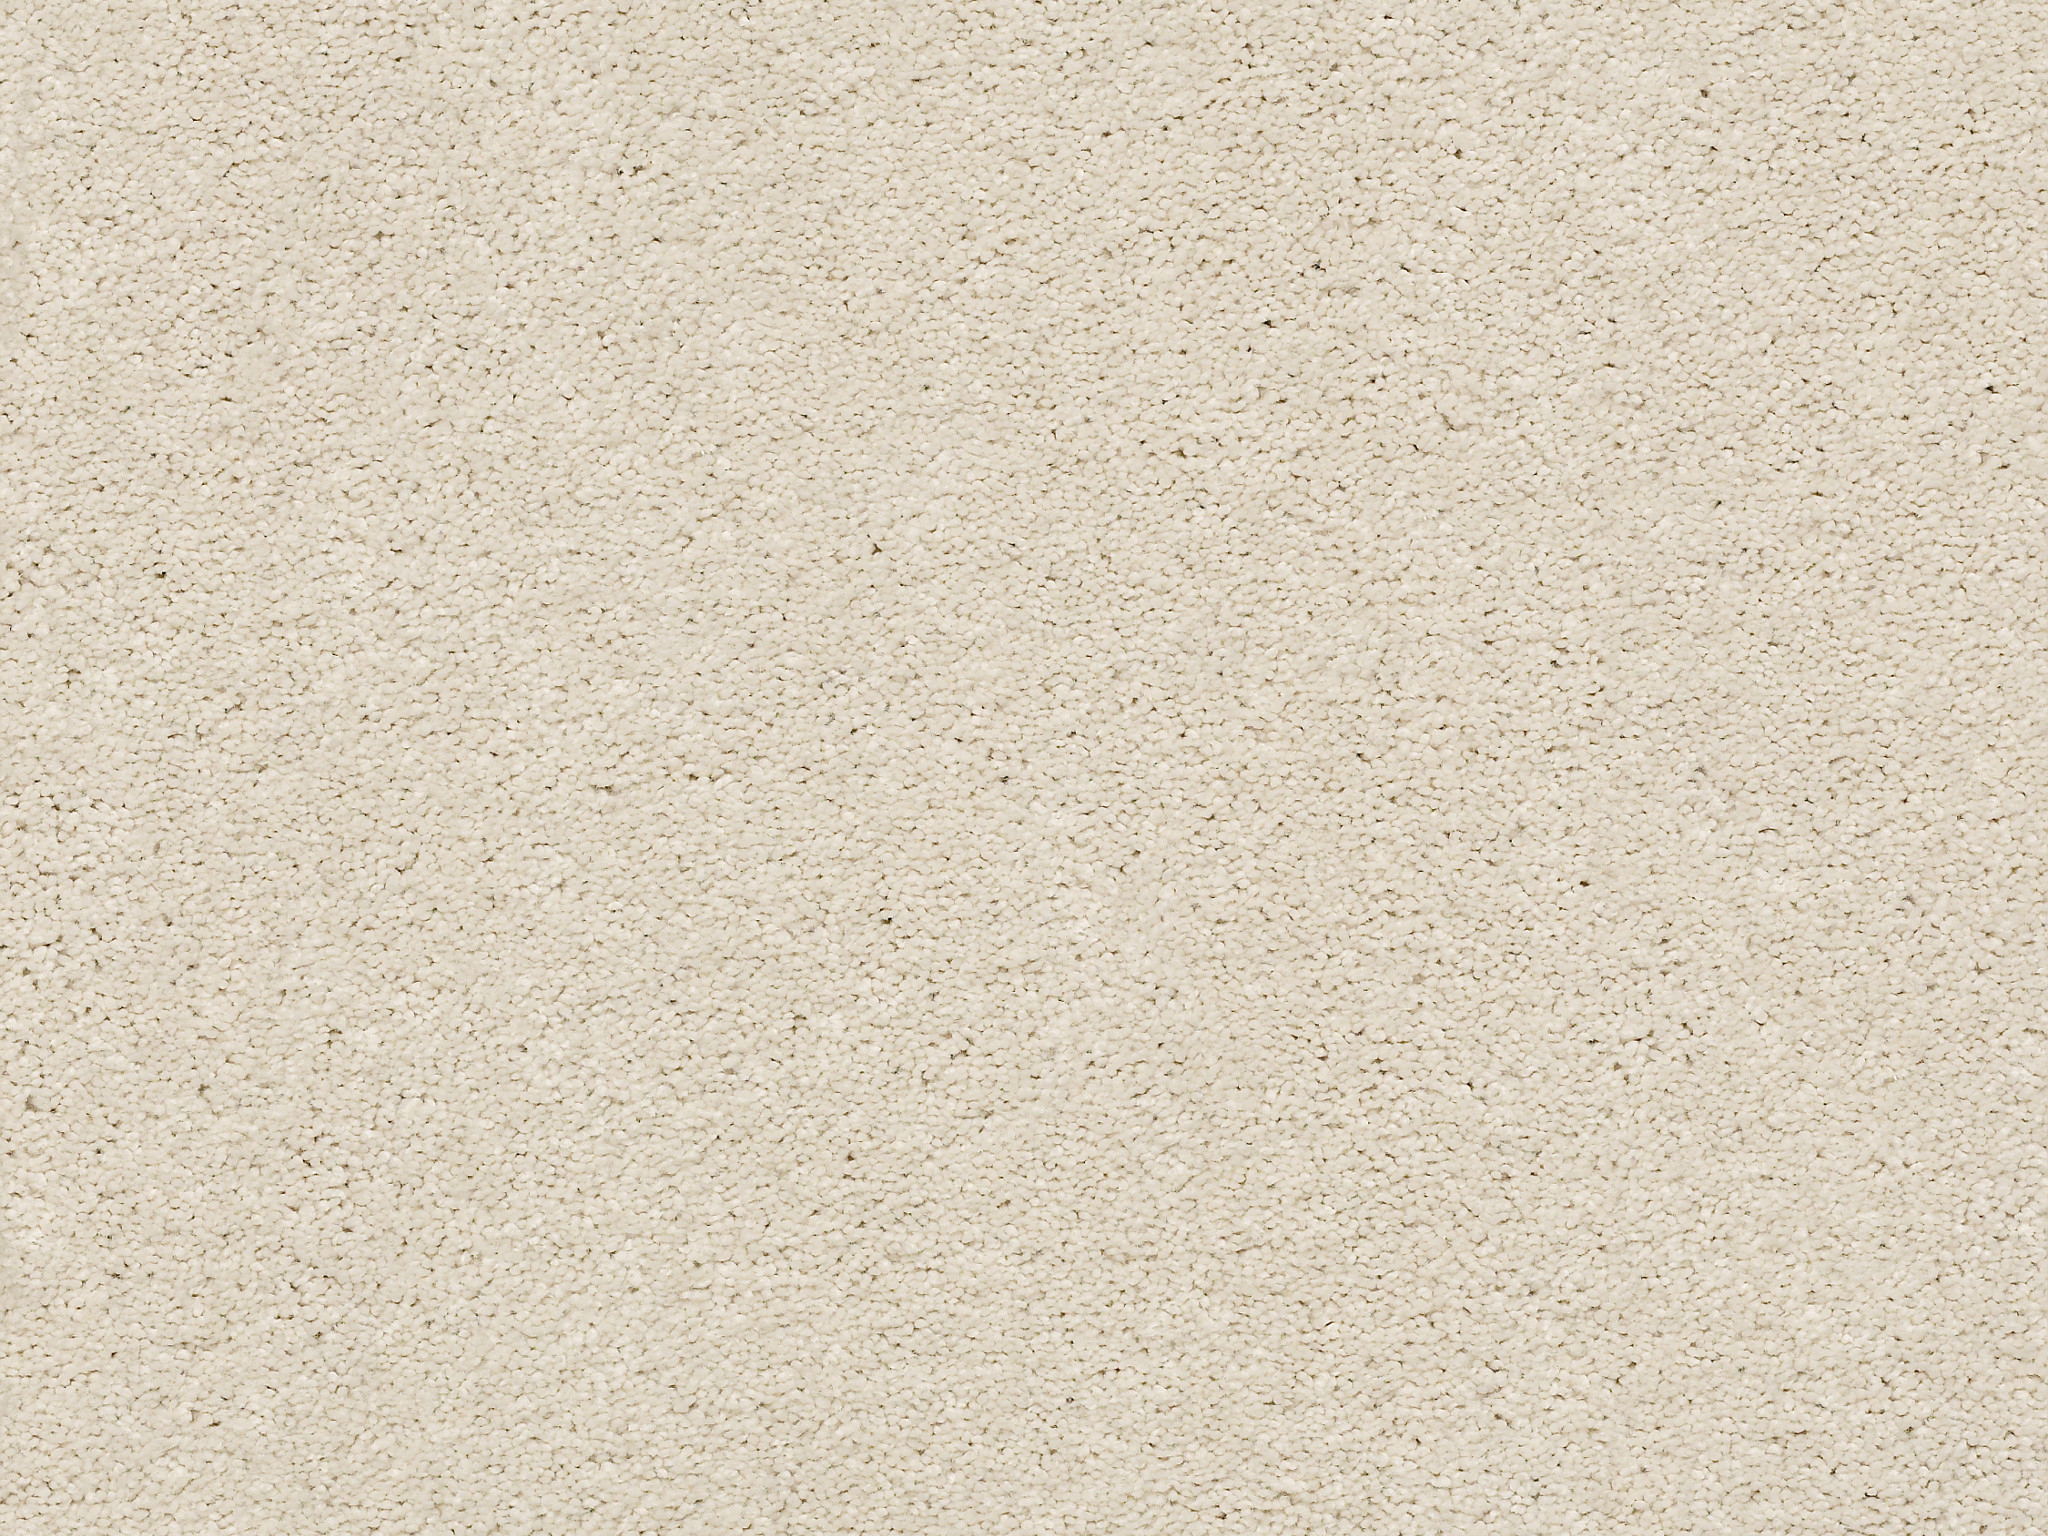 First Act Carpet - Minimal Zoomed Swatch Image